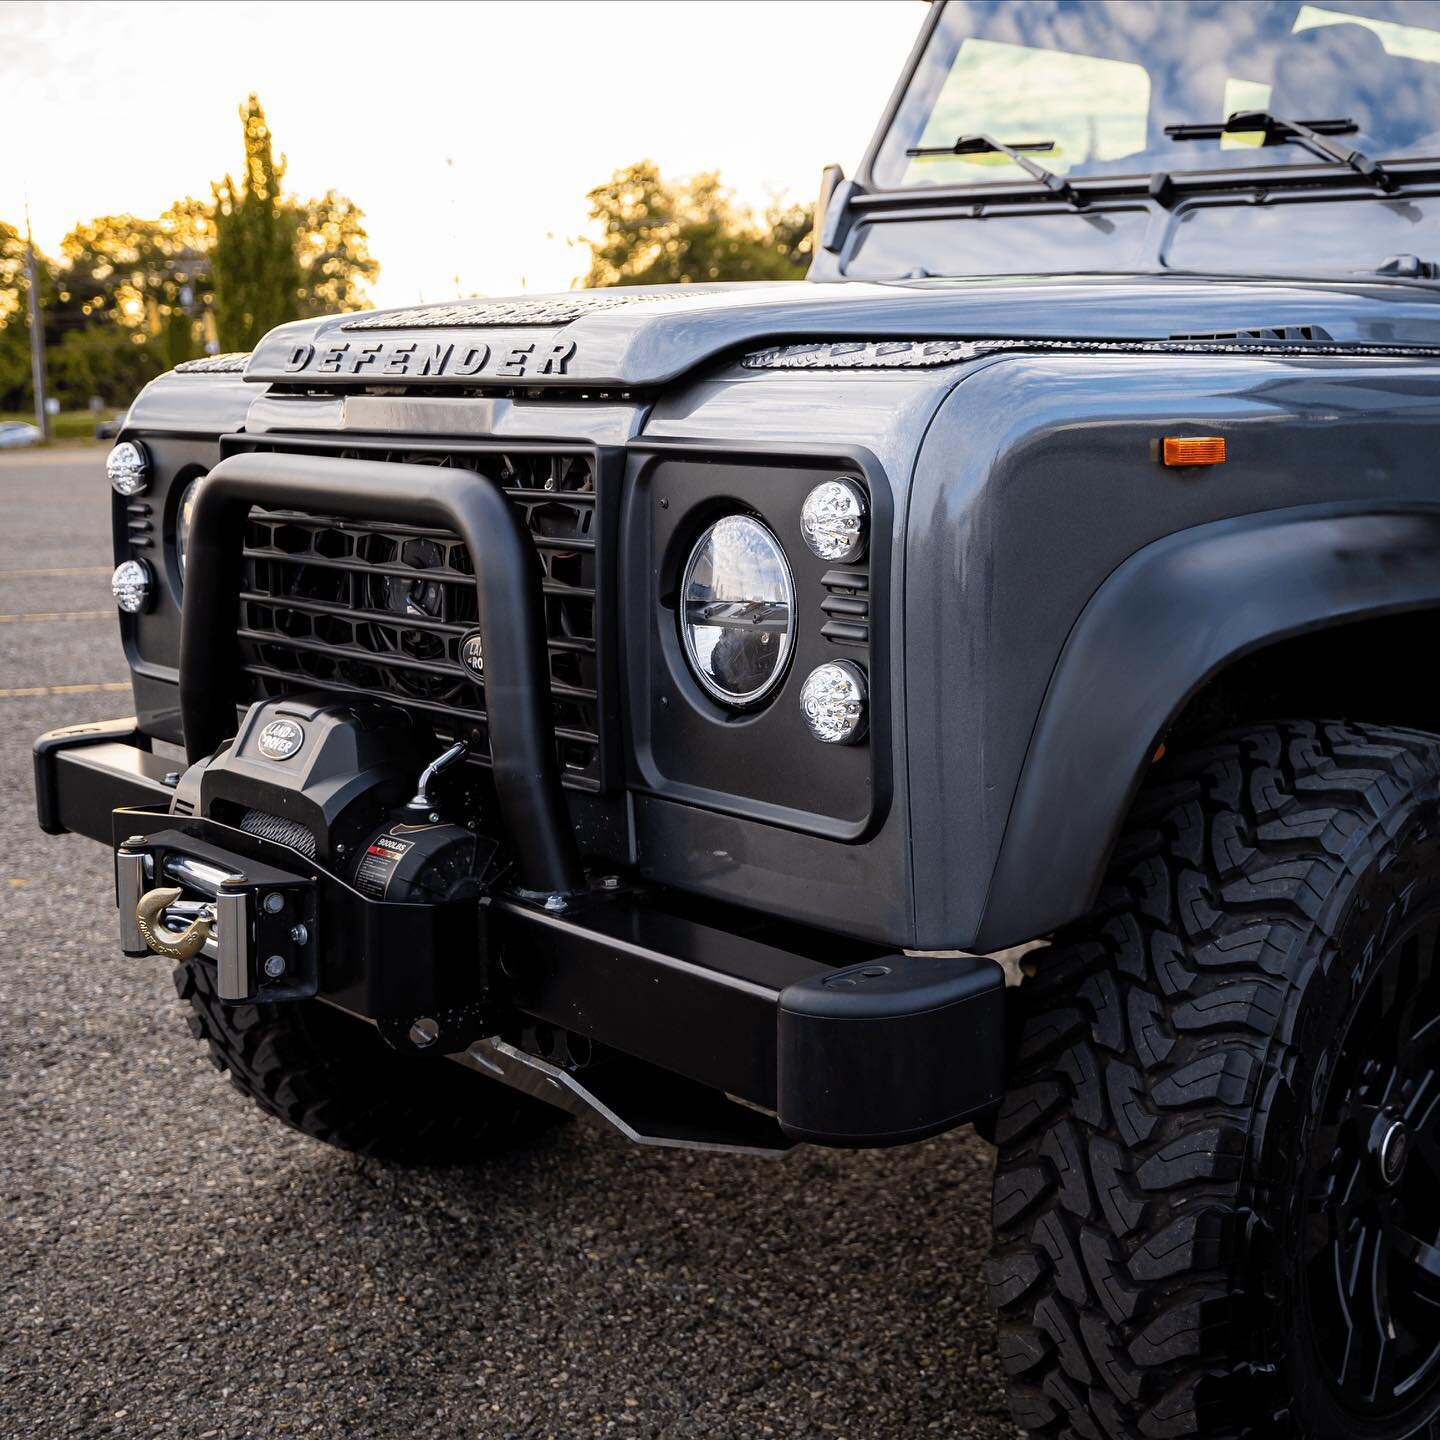 It's all in the details, am I right? New Toyo M/T Tires FTW
*
*
*
*
*
#MonarchMotors #landrover #rangeroversport #landroverdefender #defender #defender110 #defender90 #offroad #defenderlove #offroadextreme #4x4 #series #newdefender #landroverseries #